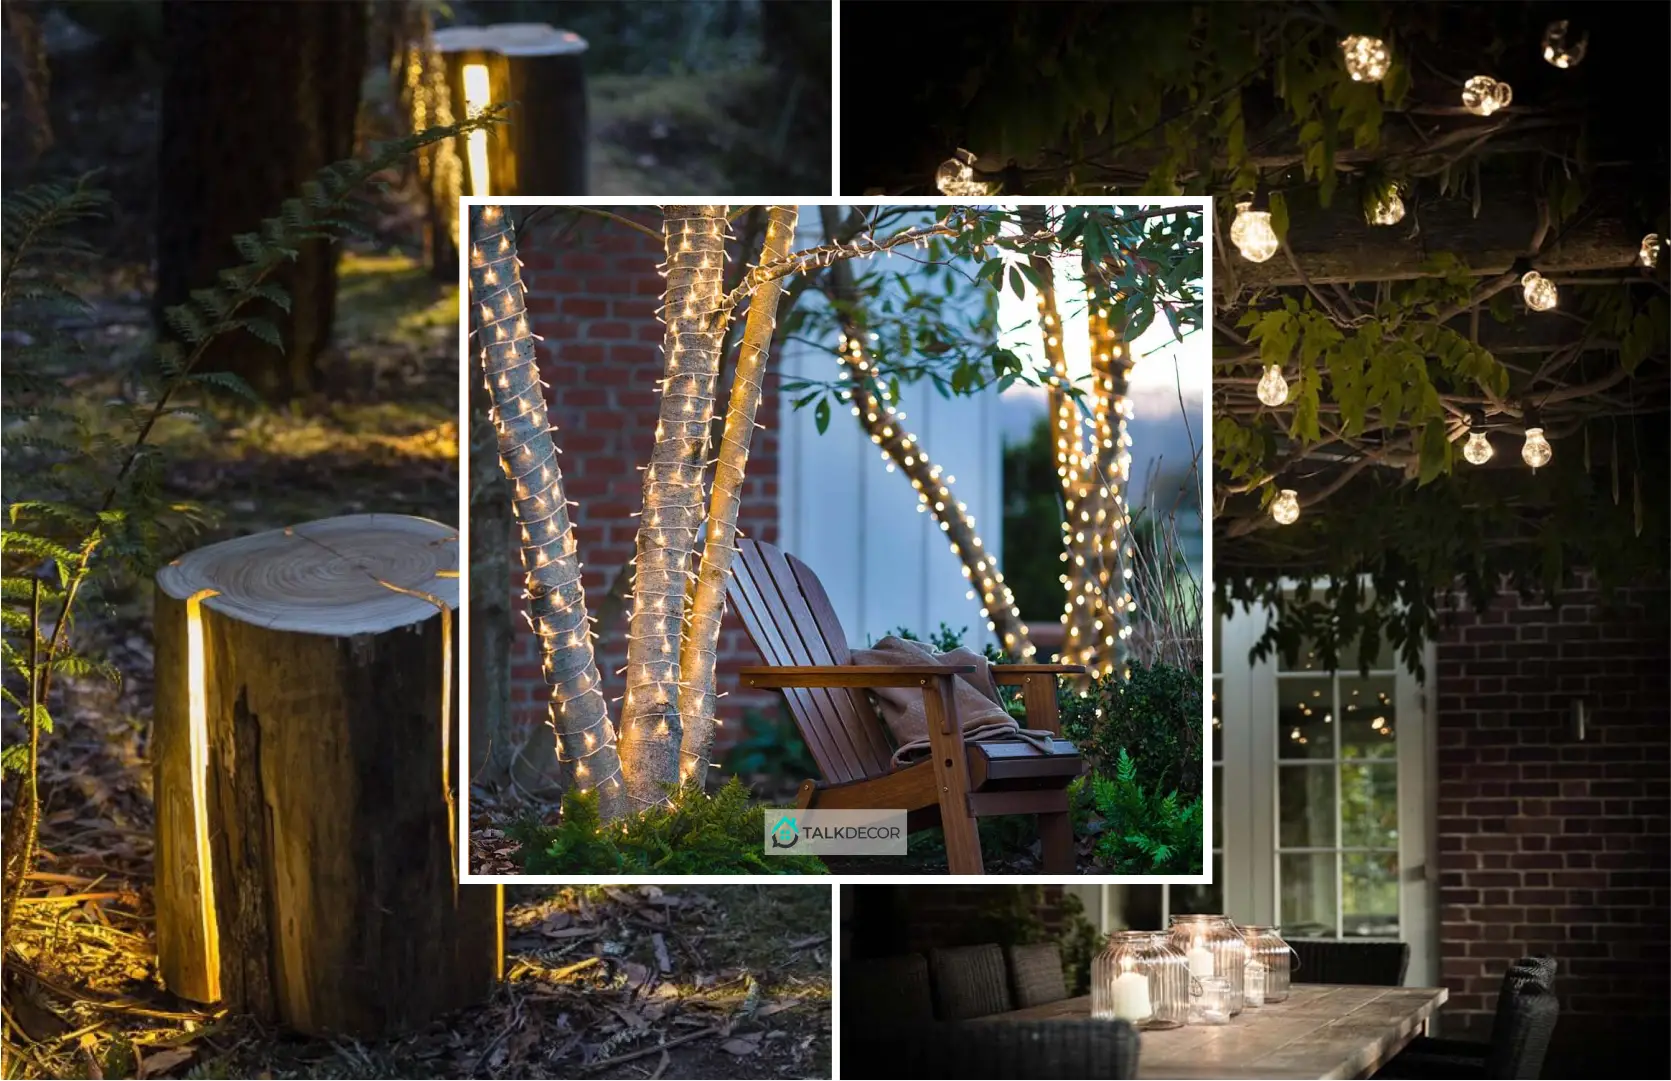 How to Install Proper Lighting to Your Backyard